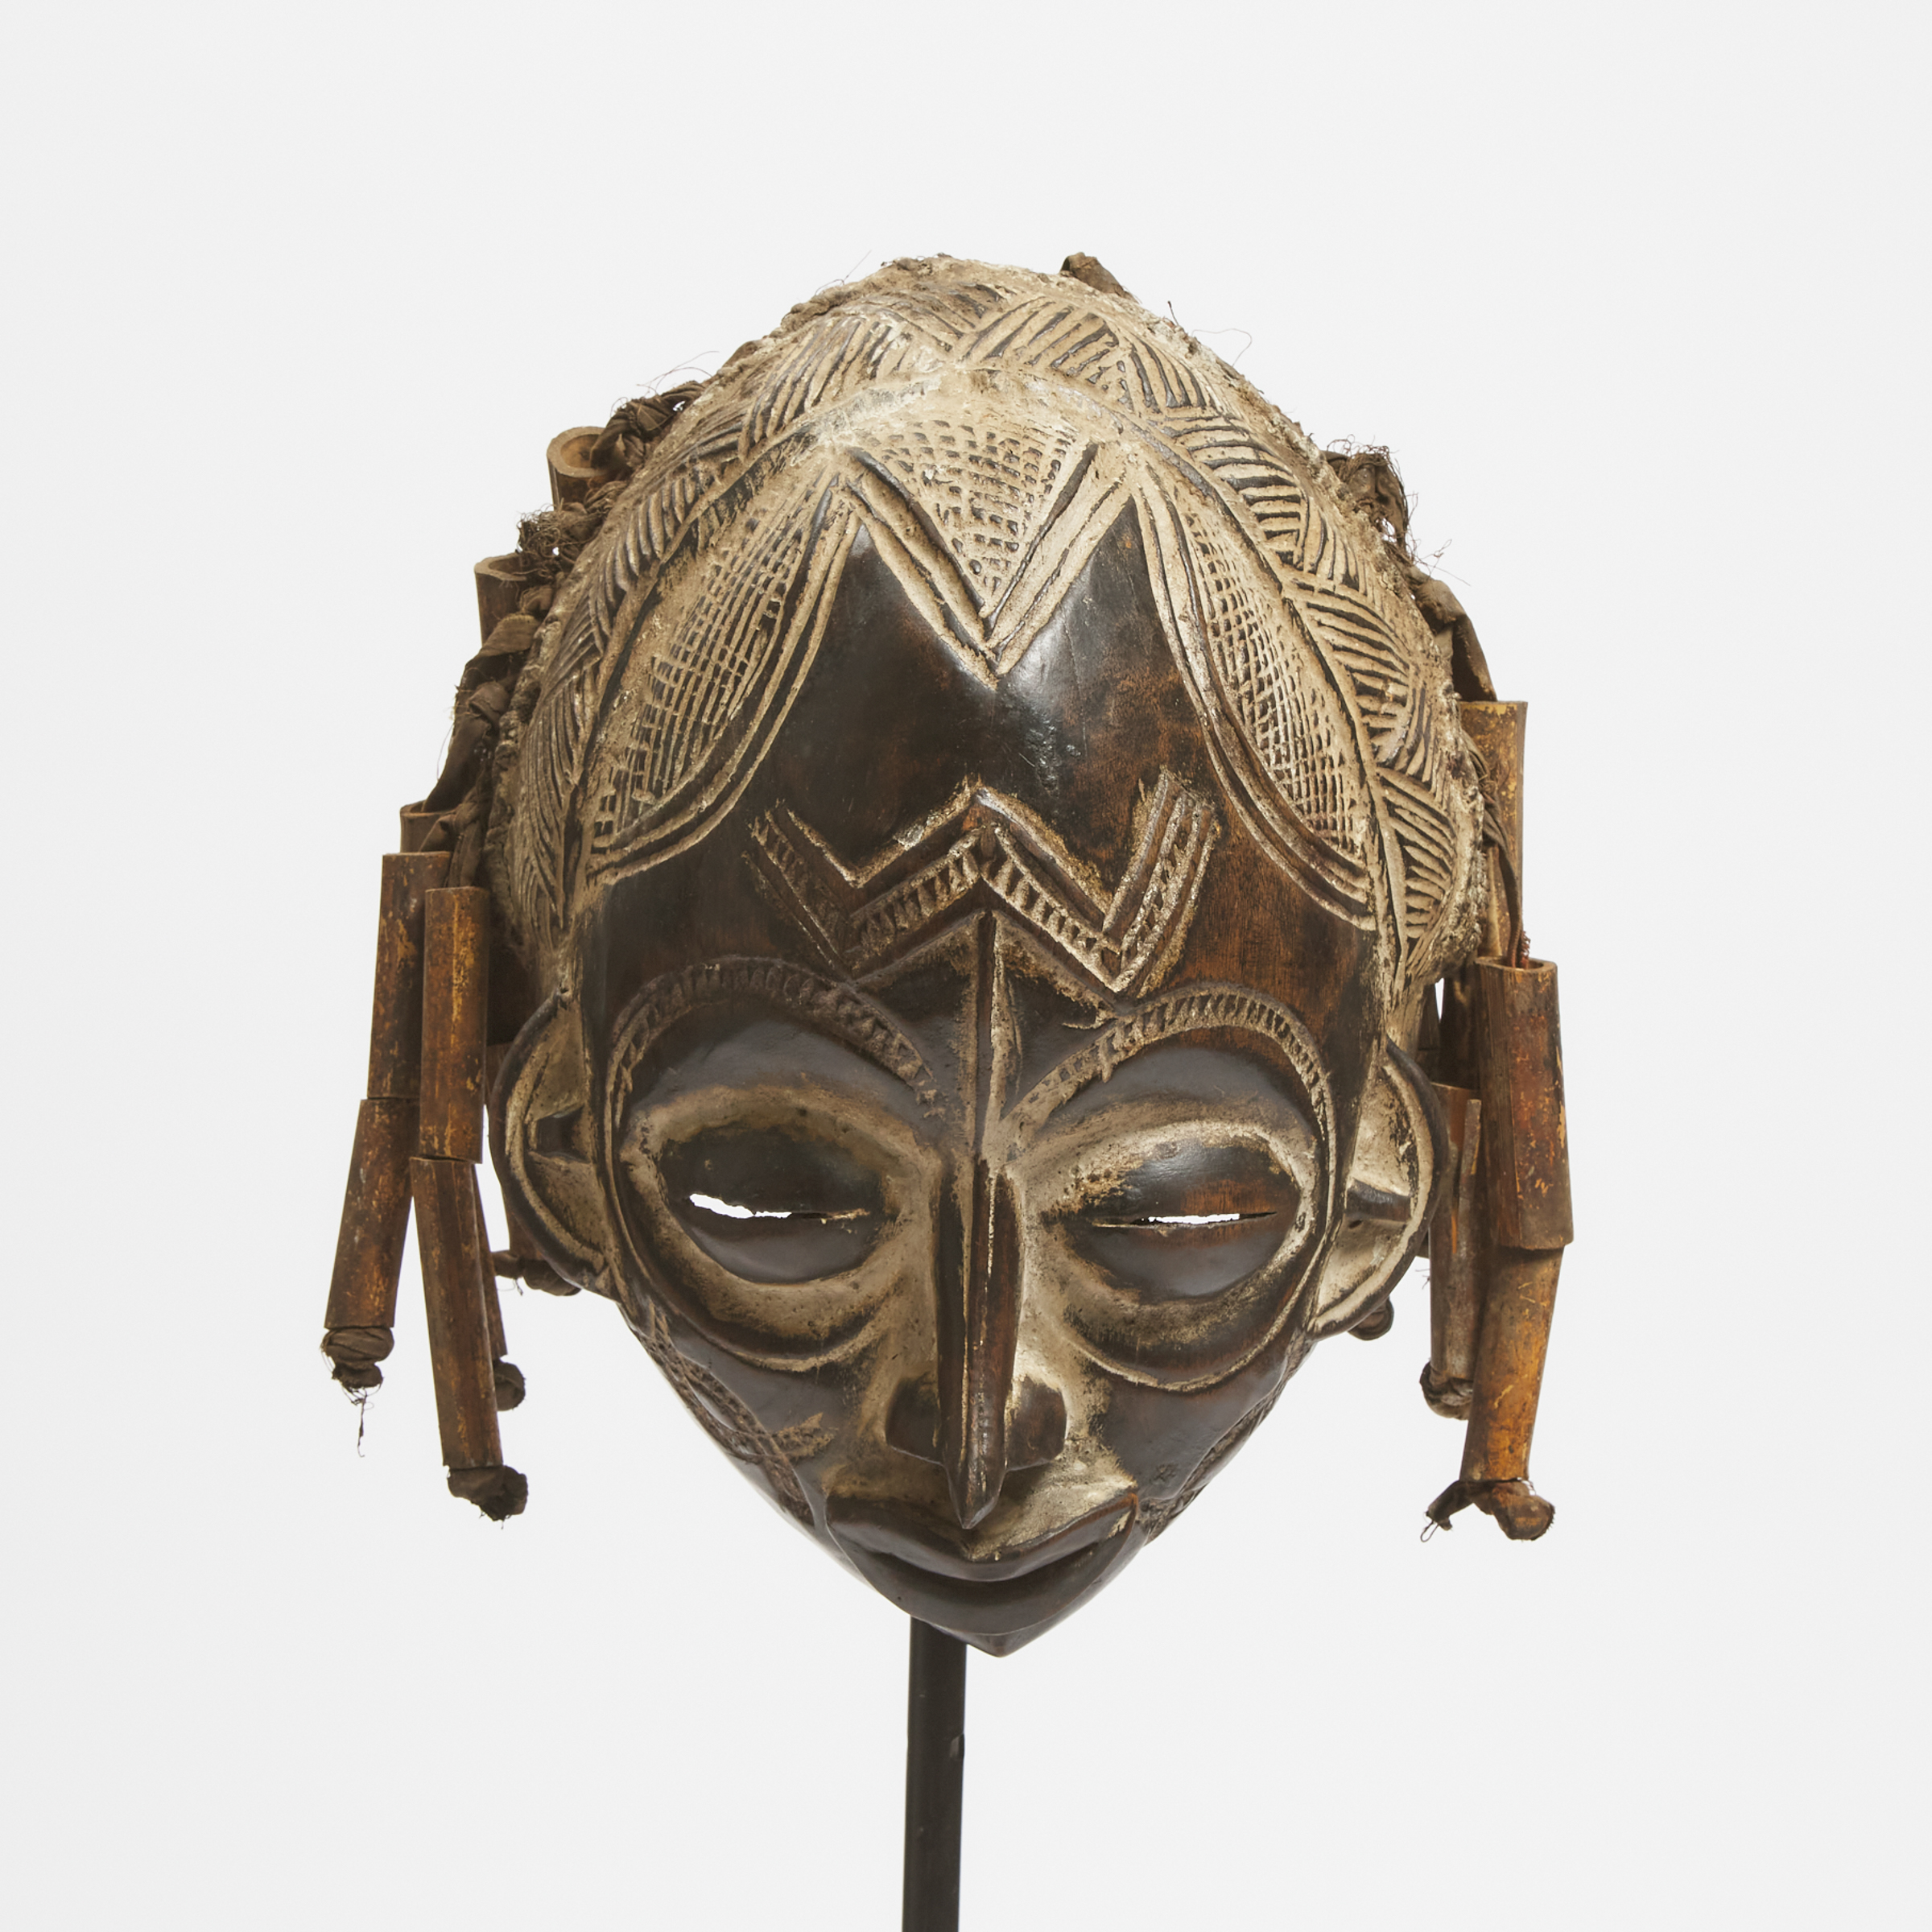 Chokwe Mask, Central Africa, late 20th century